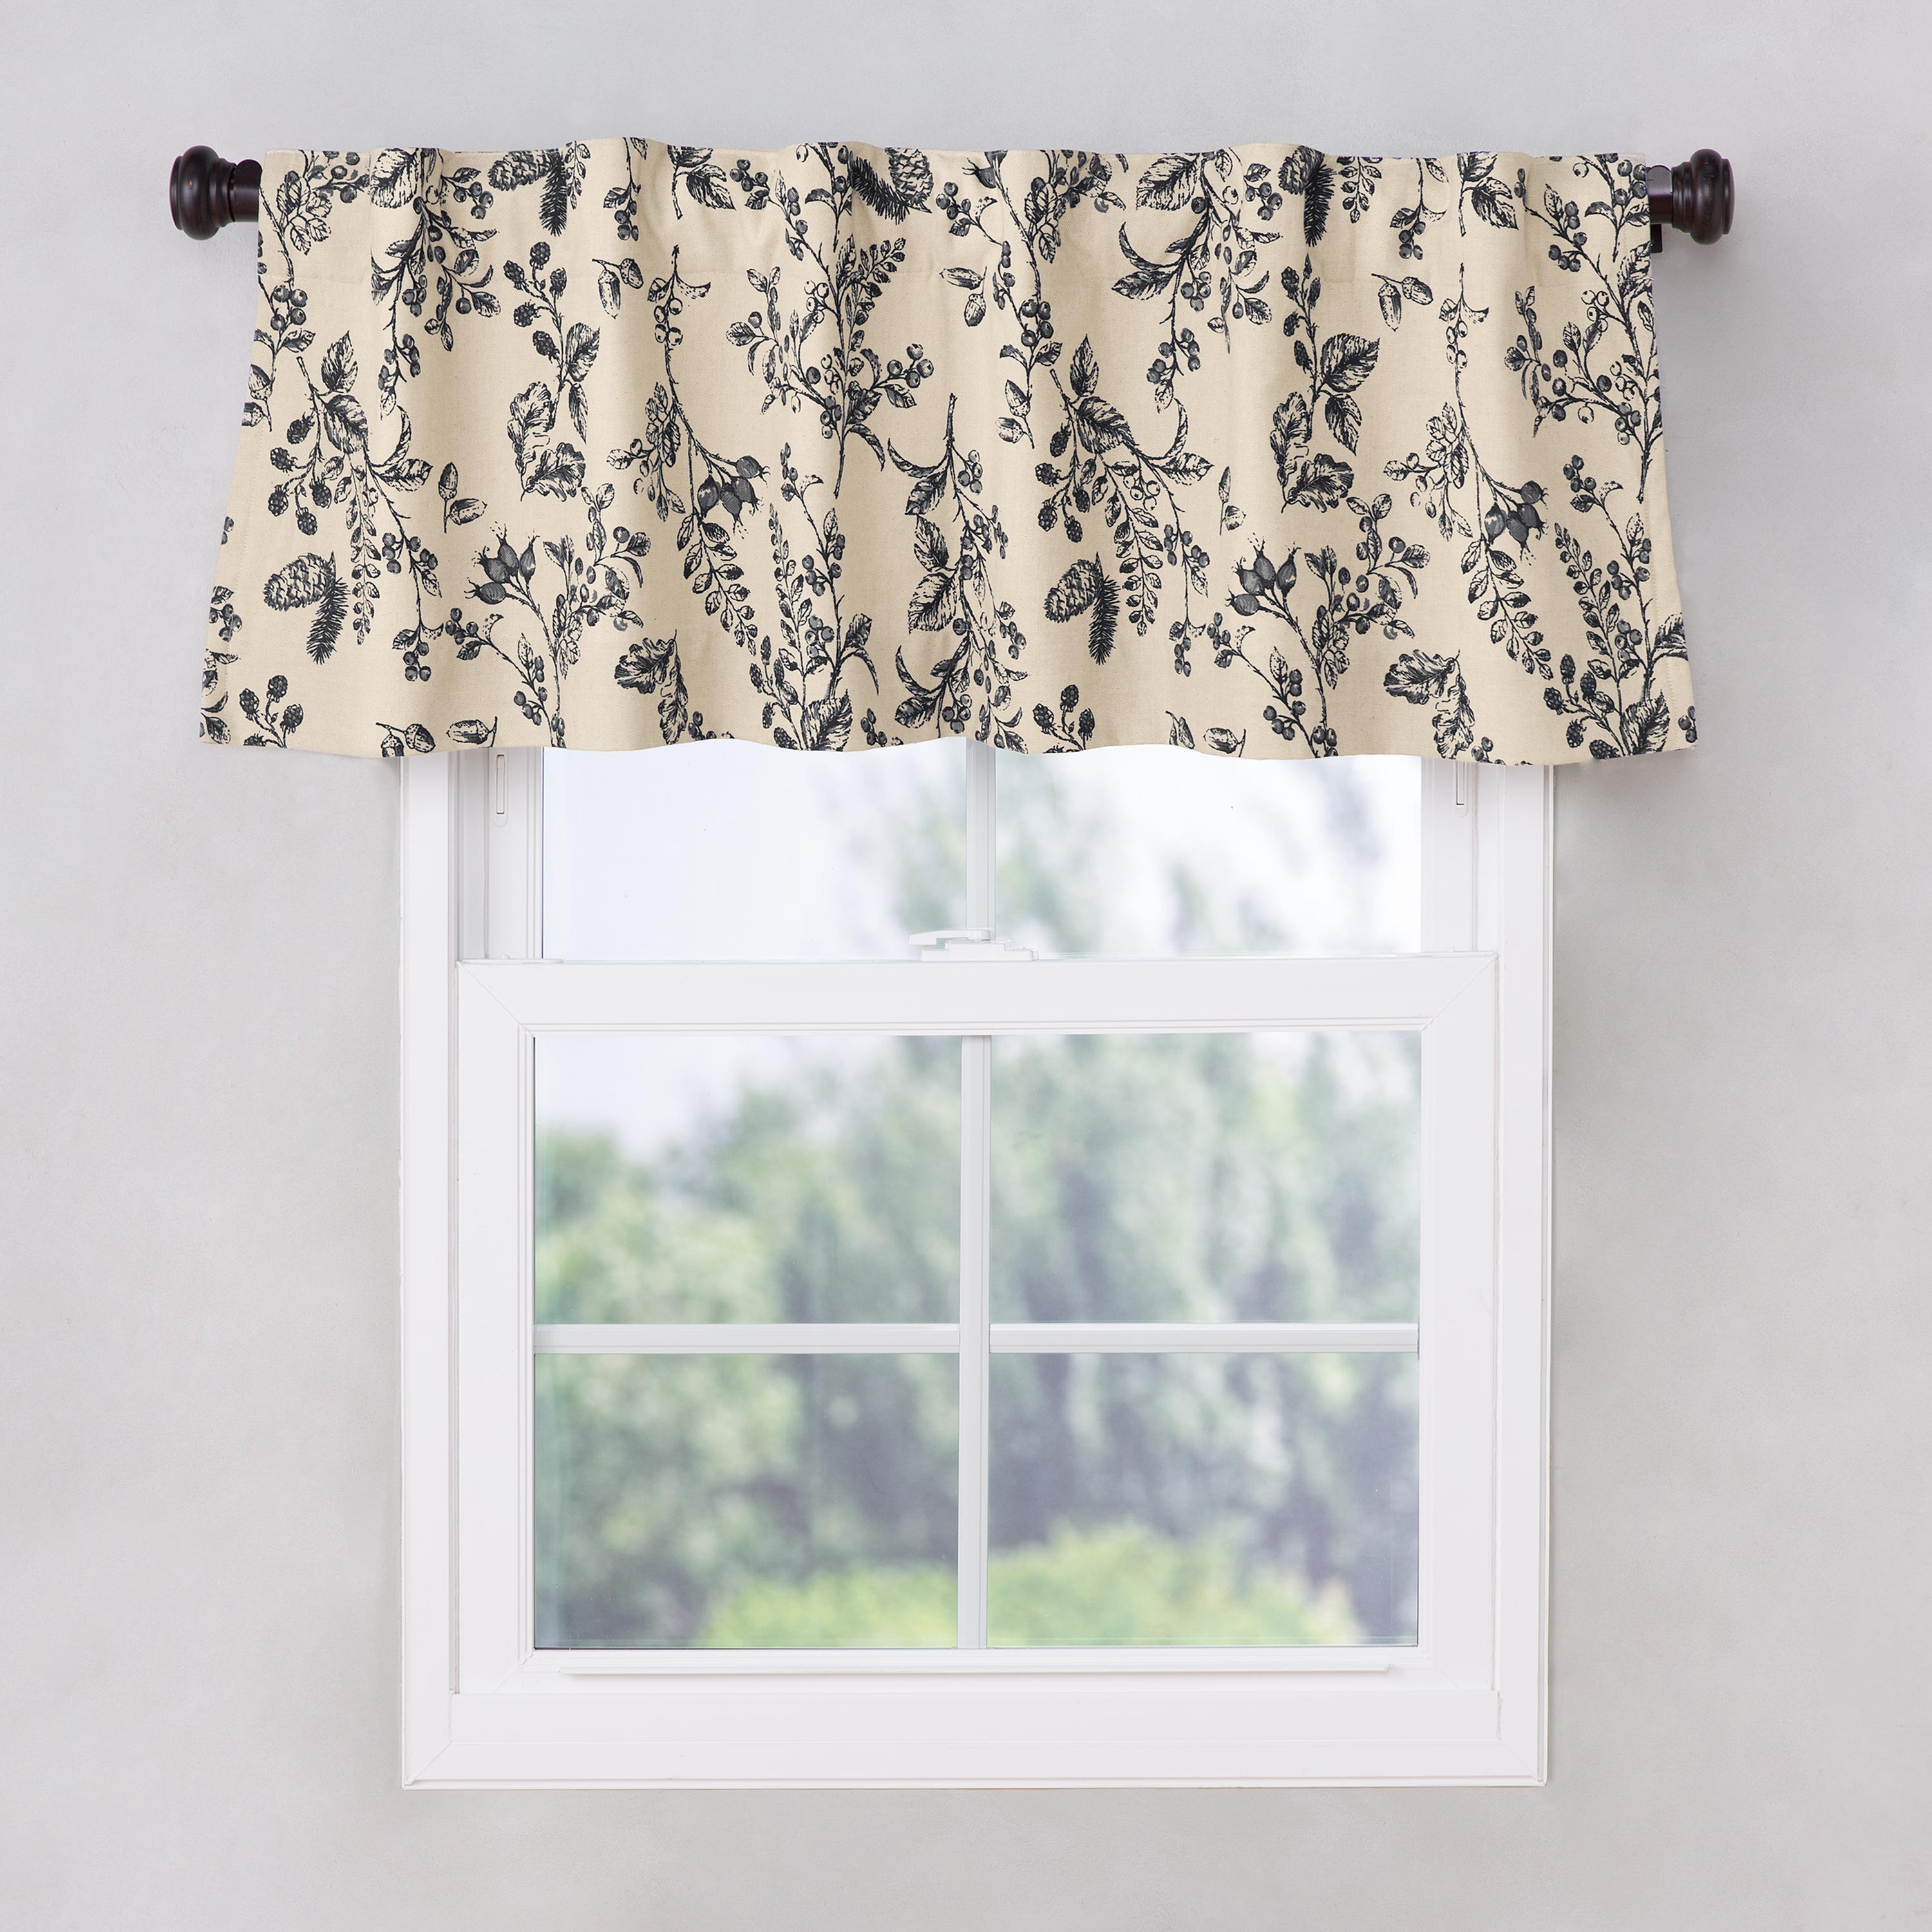 Botanical Toile Insulated Double-Lined Valance, 42"W x 14"L